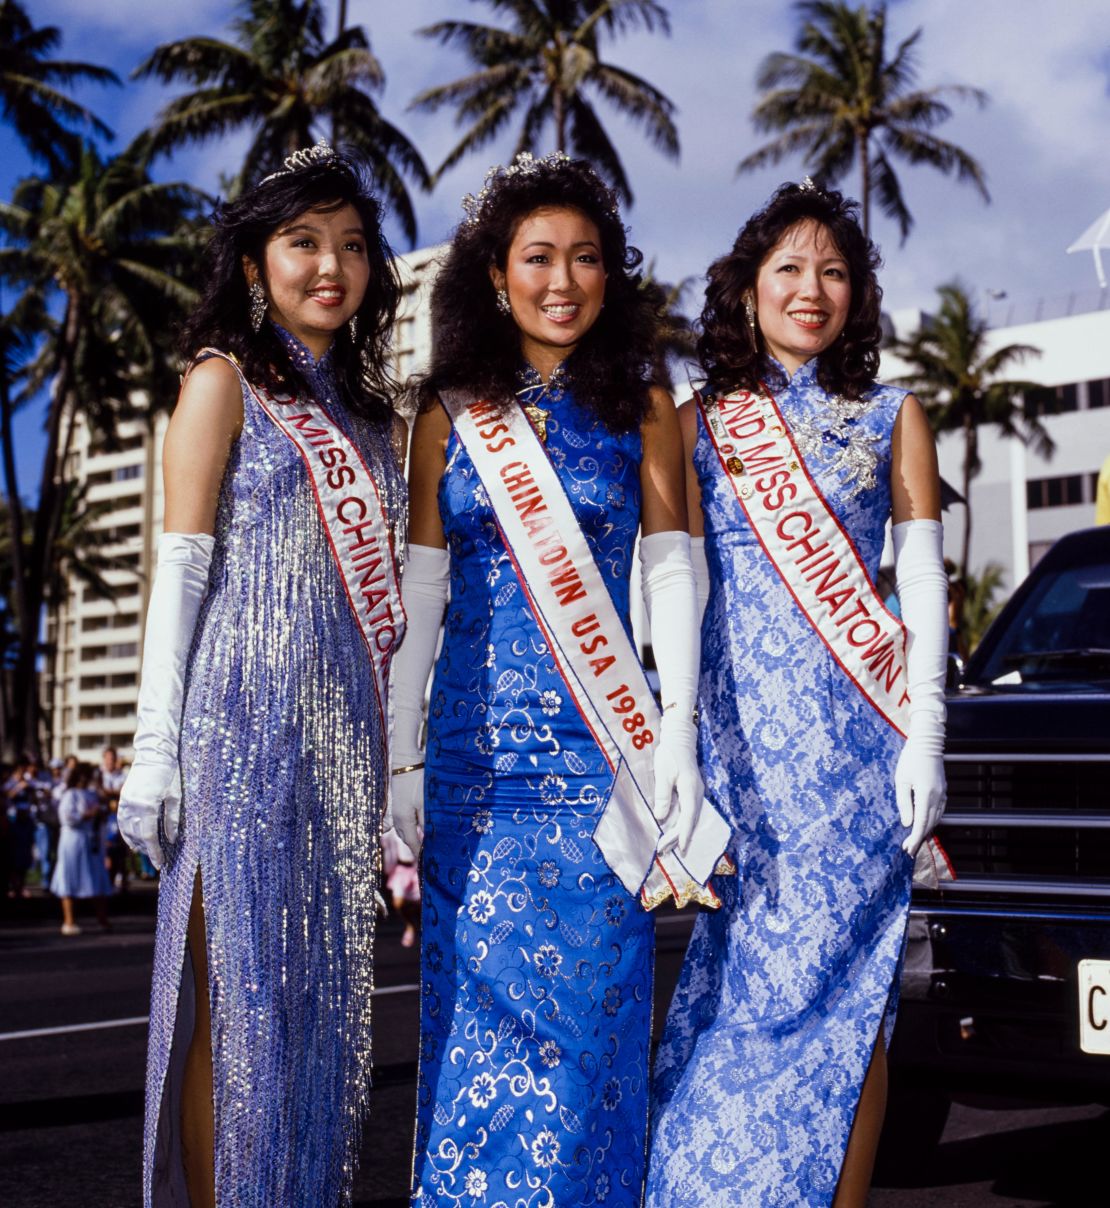 Competitors of the 1988 Miss Chinatown USA pageant pose for cameras in Oahu, Hawaii.